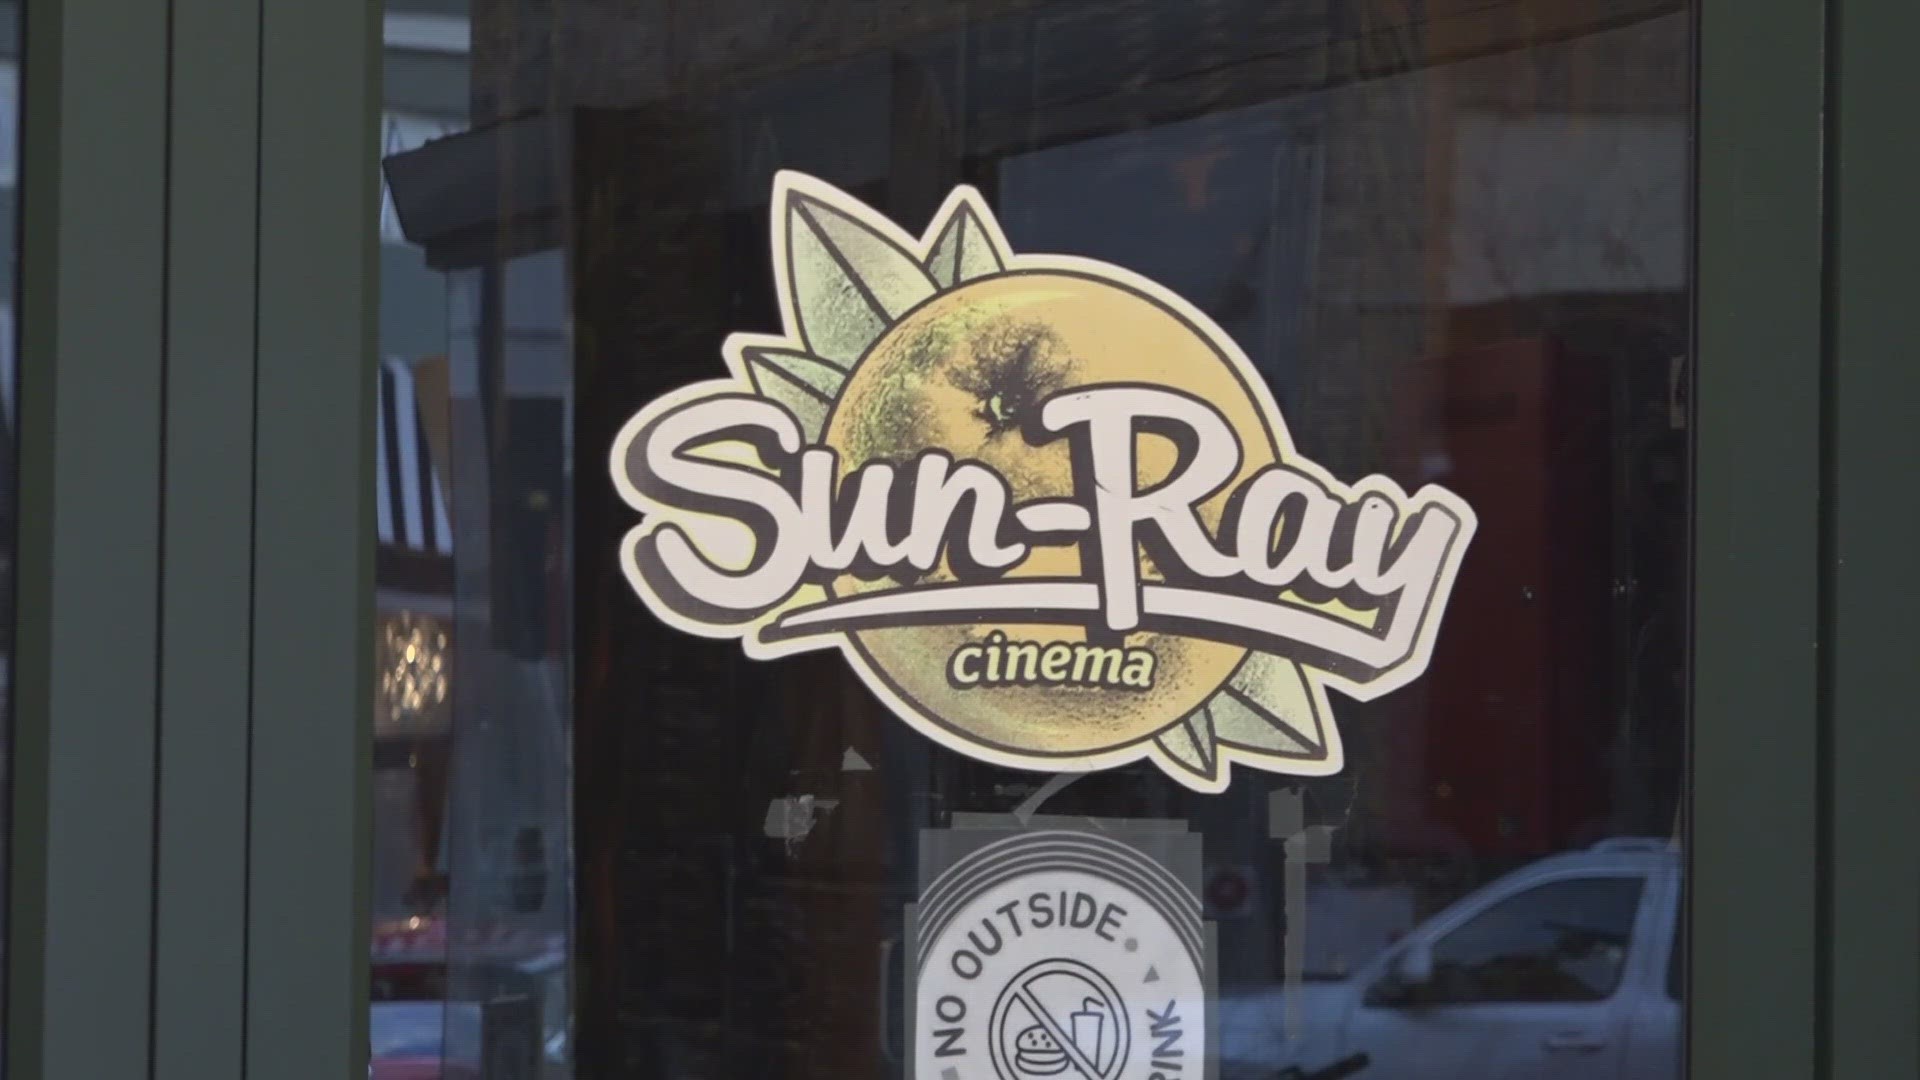 Jimmy Peluso, the councilman who oversees the Five Points district, says there is no chance the Sun-Ray Cinema building will become a parking garage any time soon.